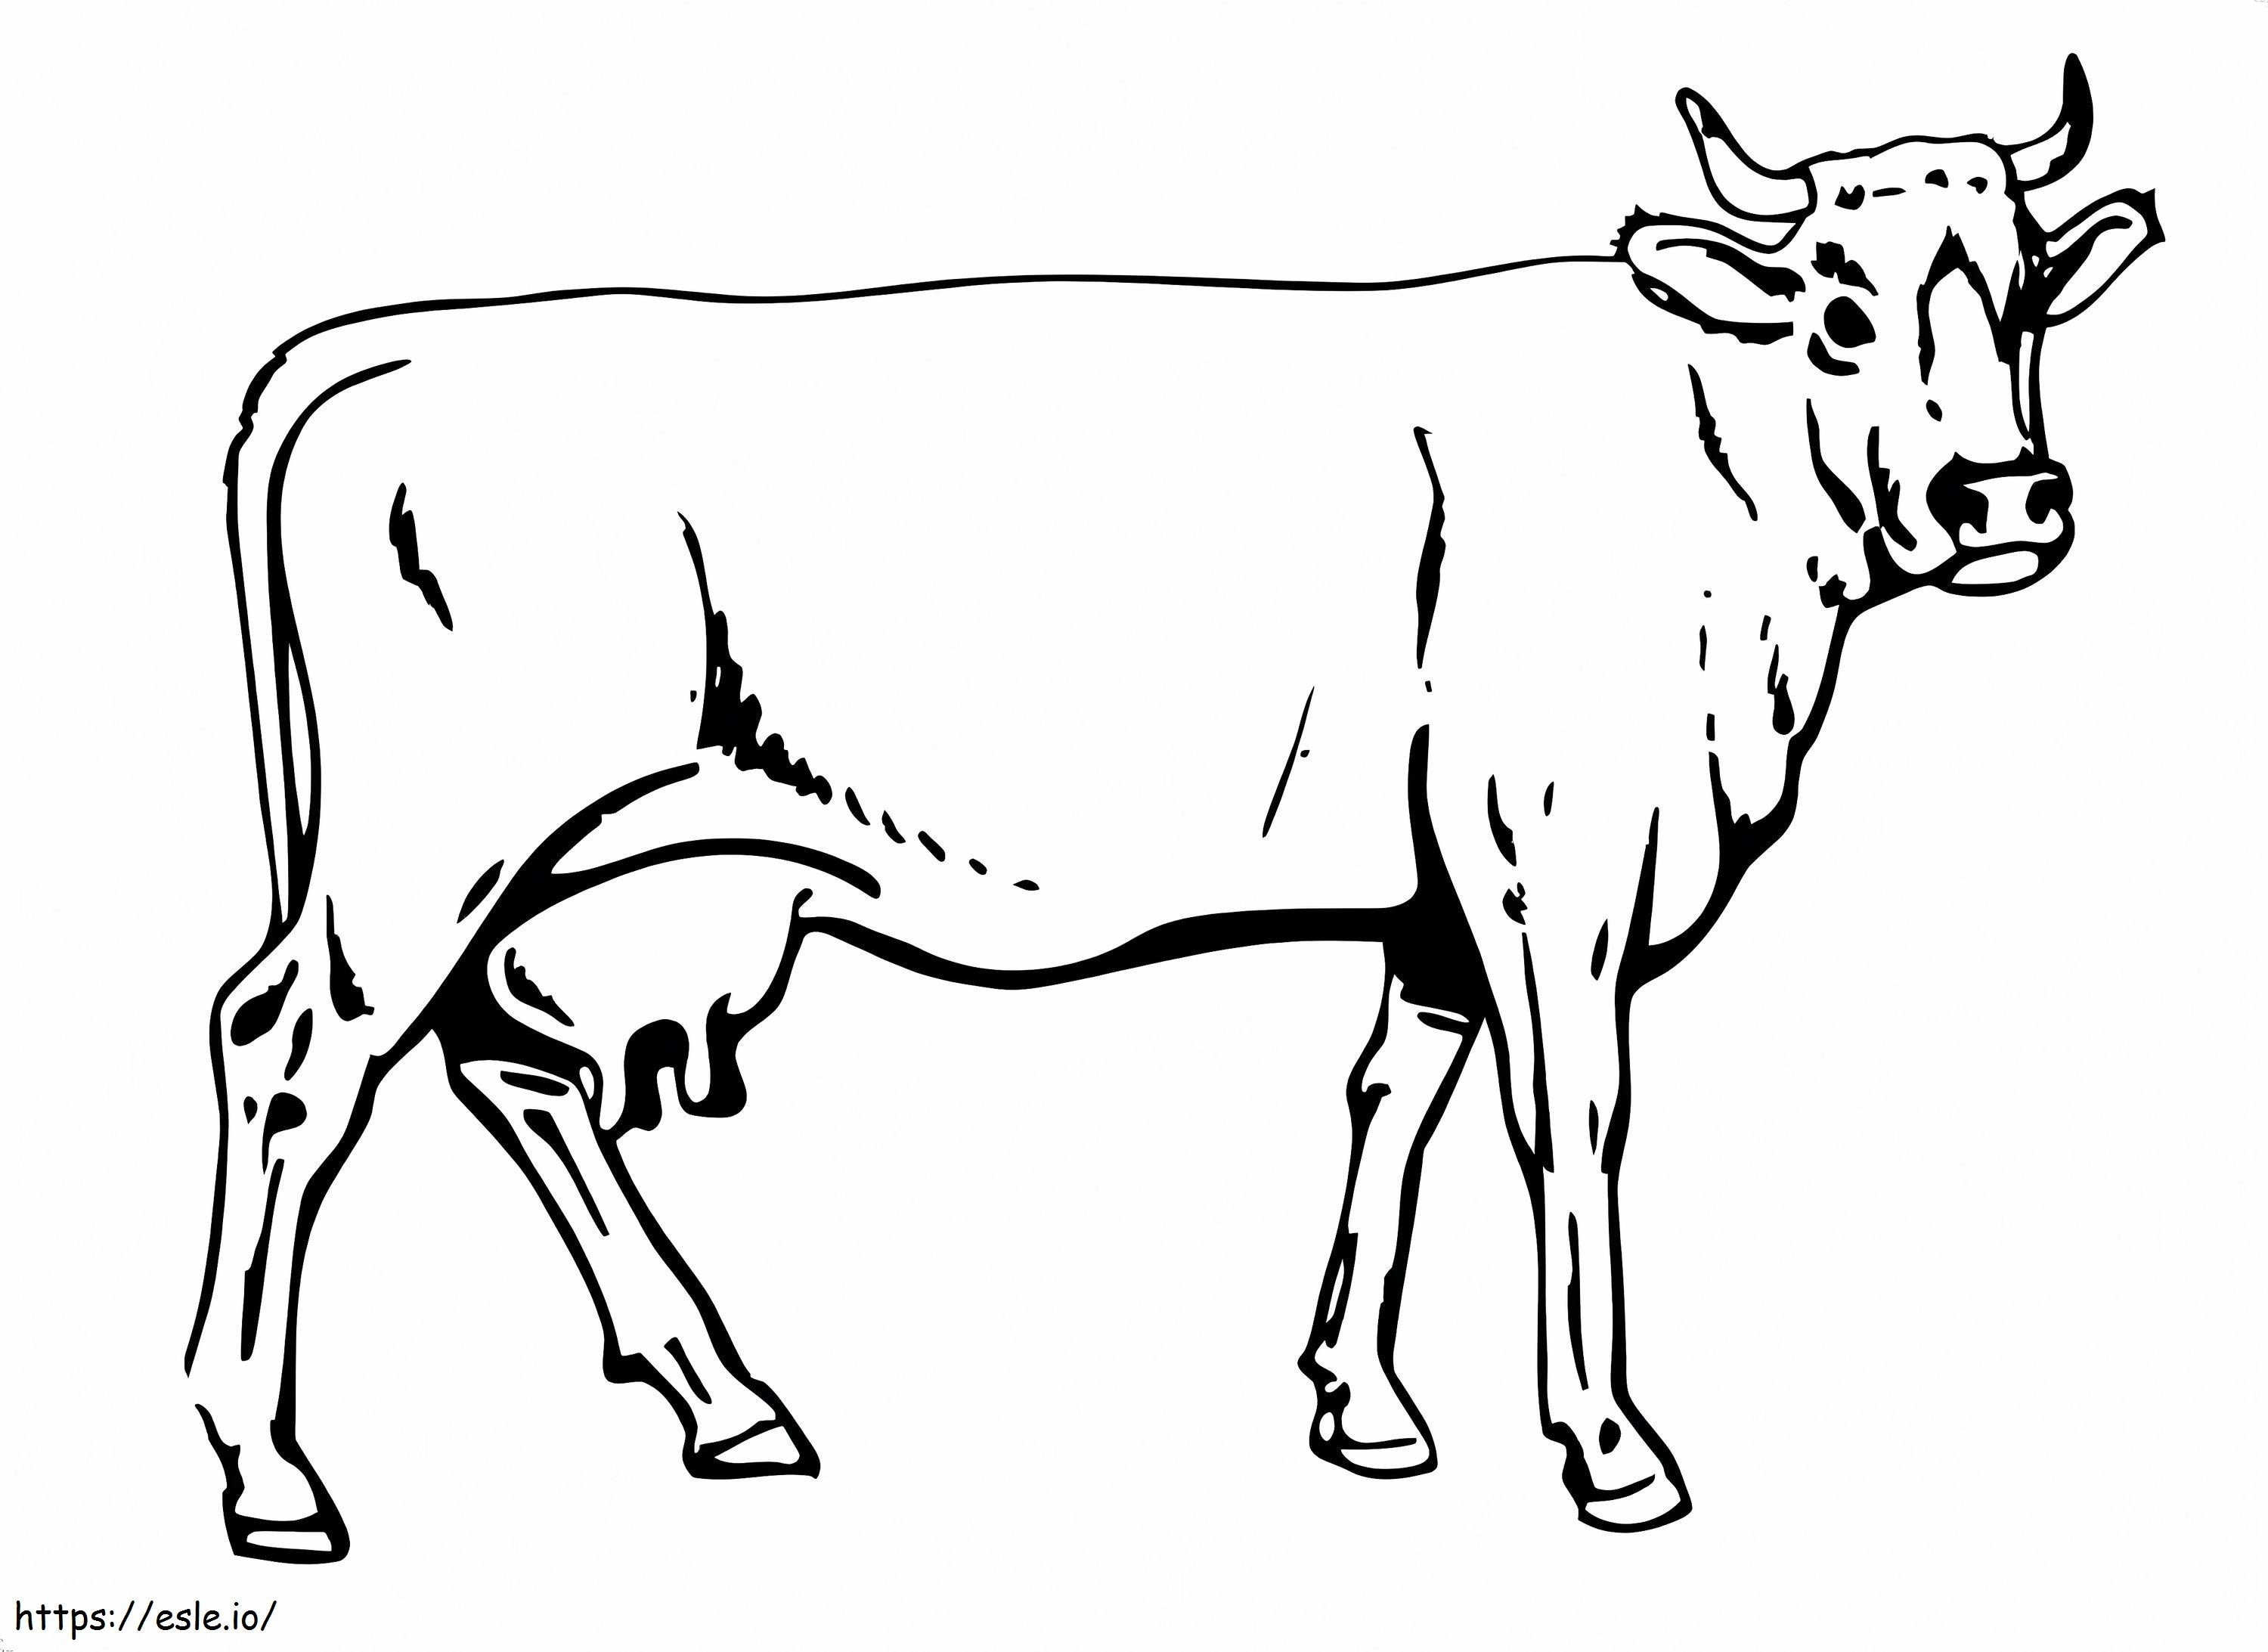 Cow 5 coloring page